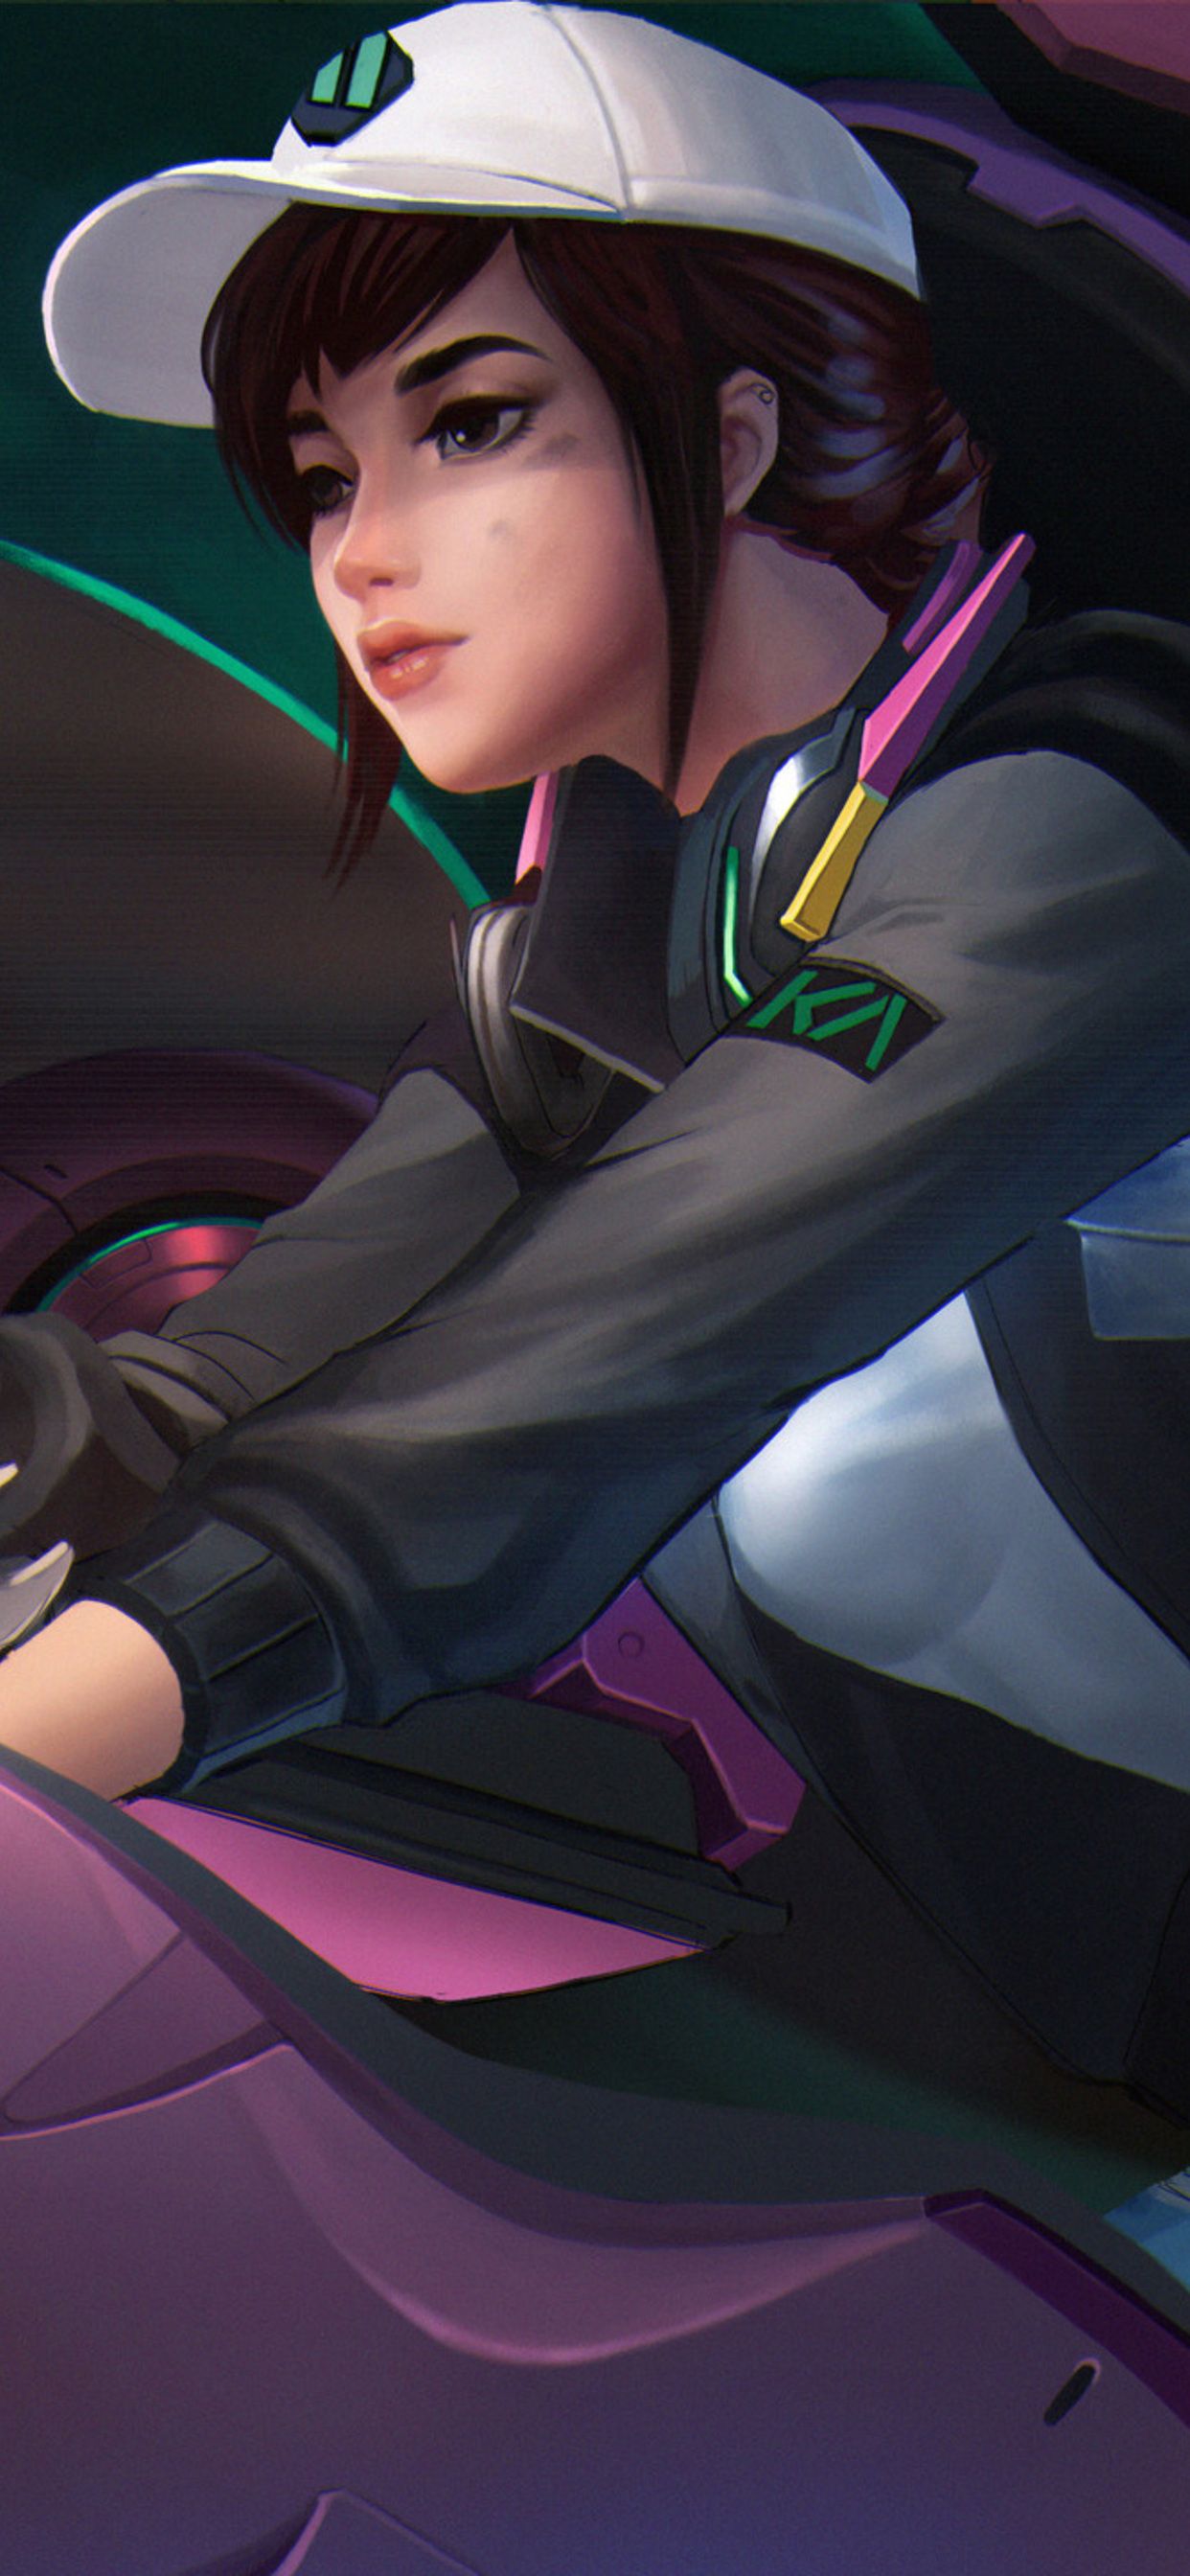 Overwatch Dva Wallpaper iPhone HD For Android